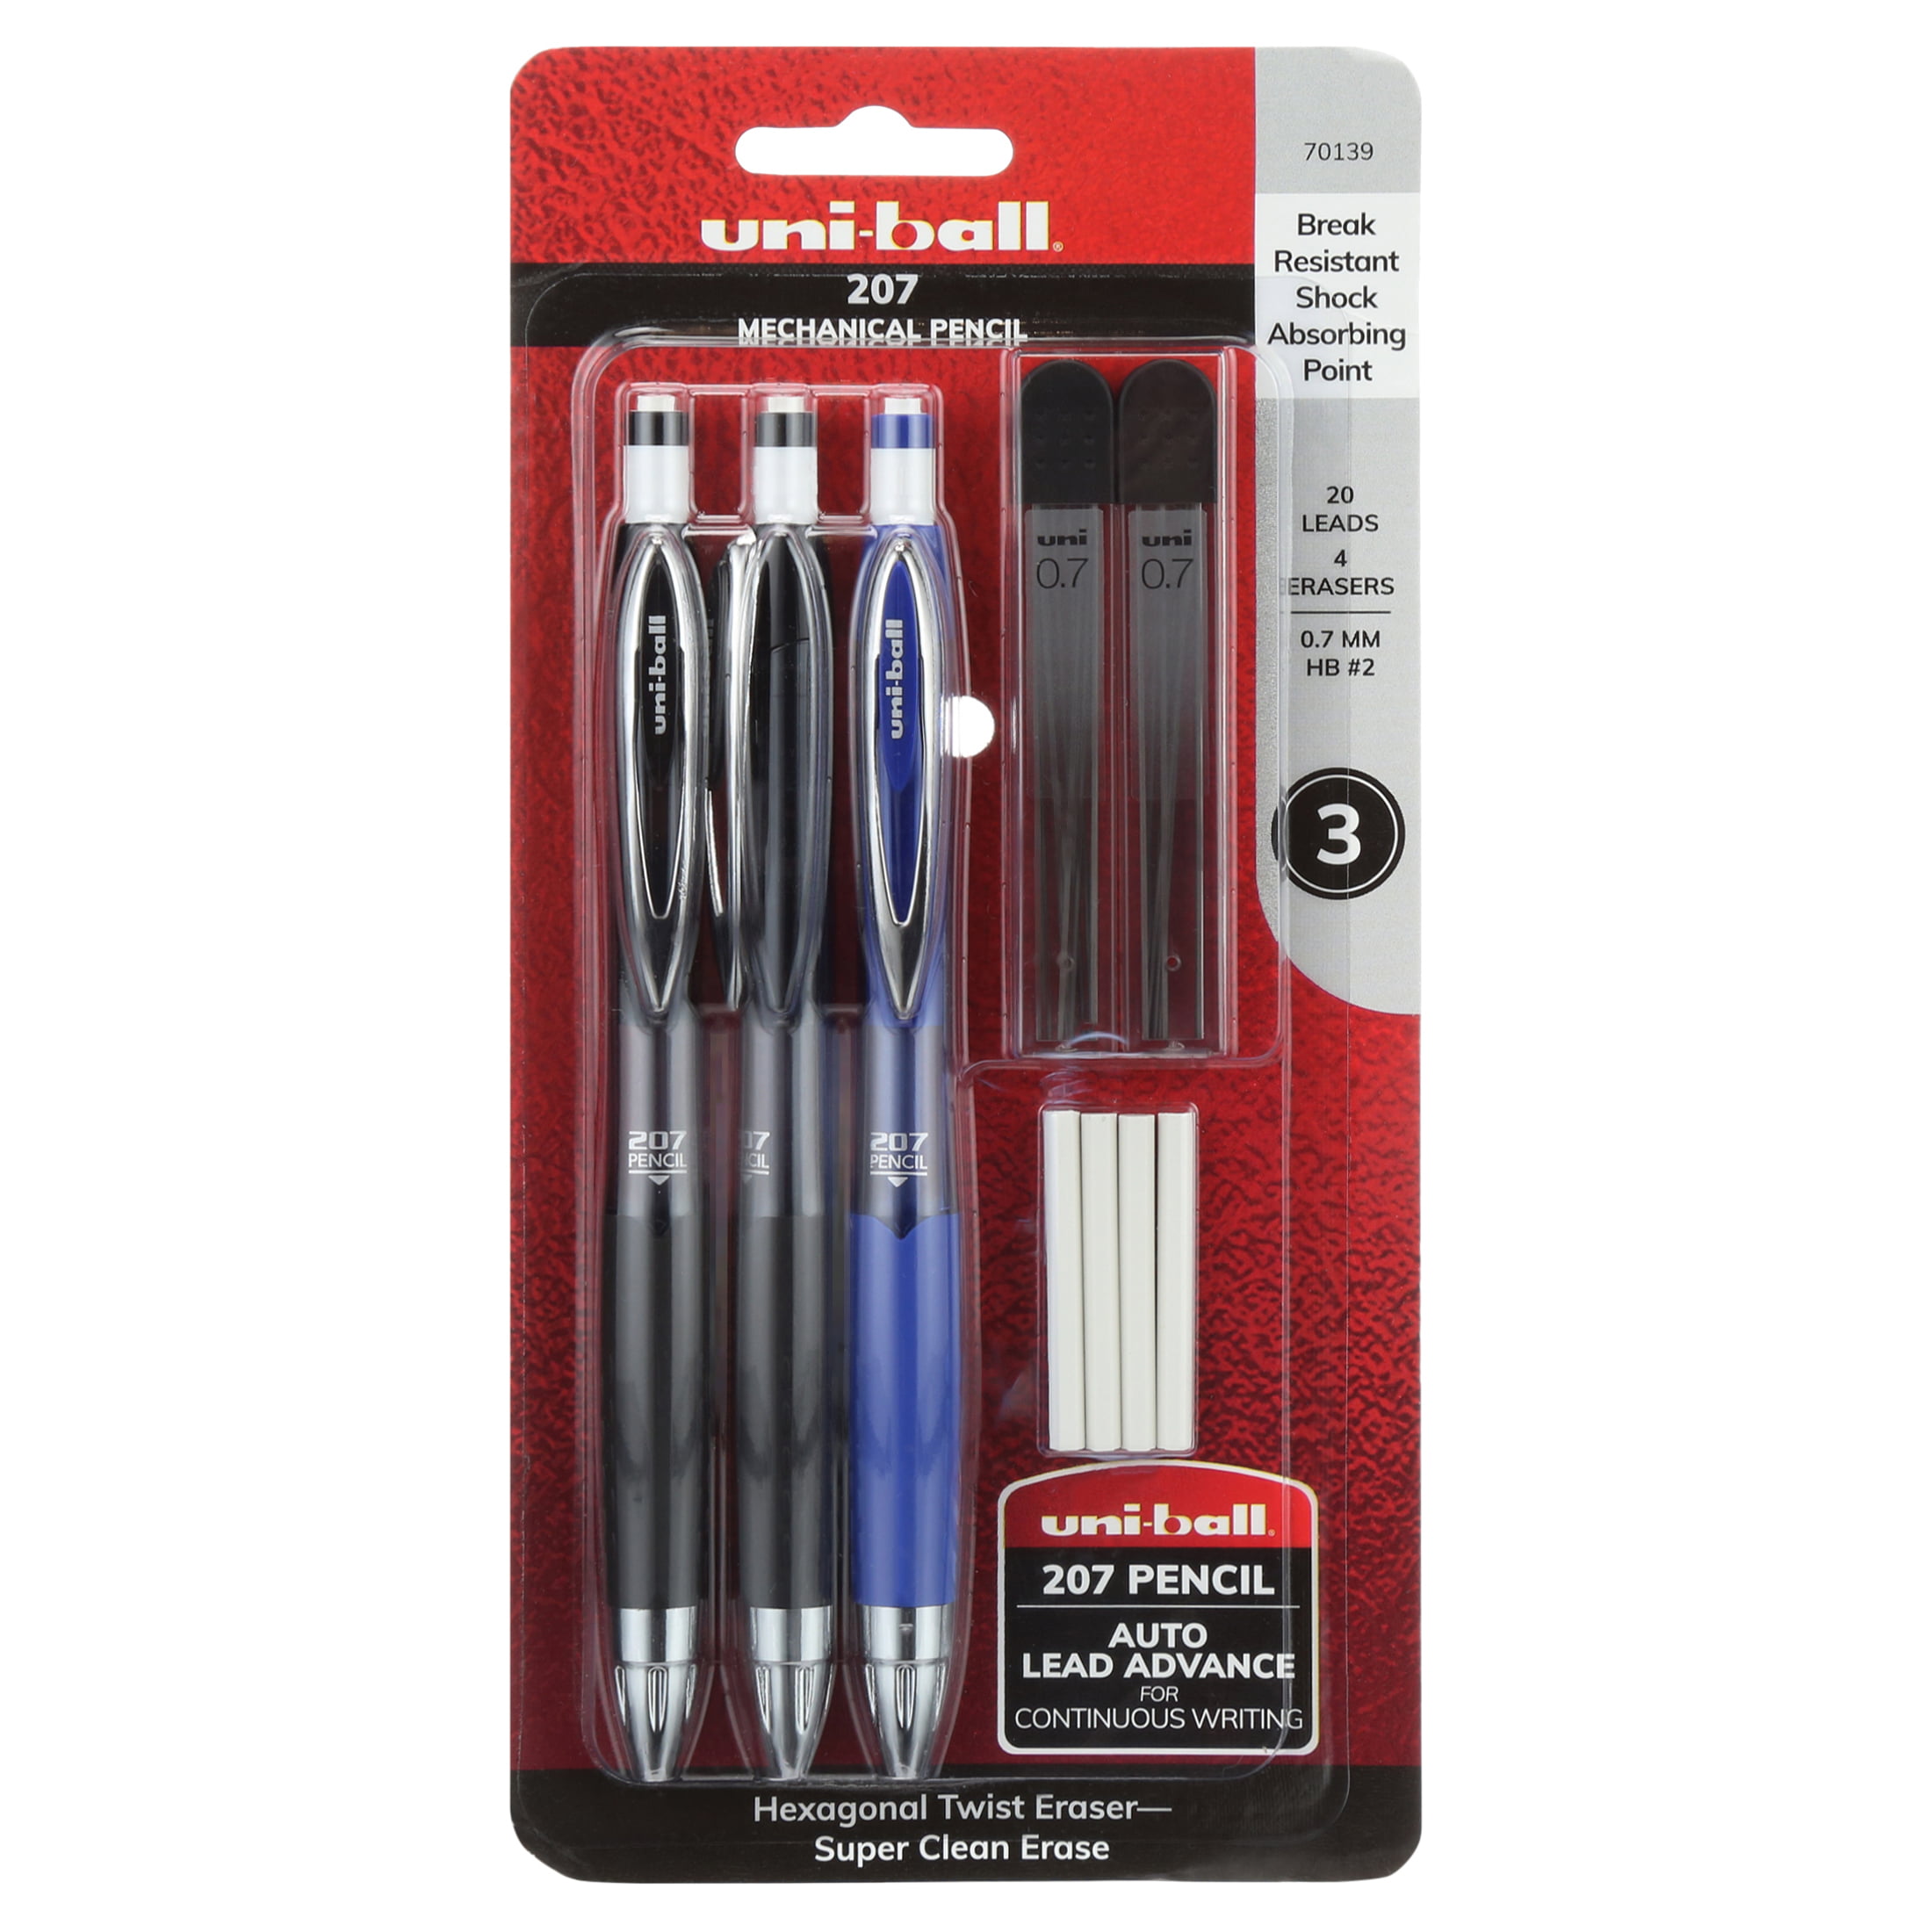 Lead Refill 1.0 mm HB Rotring Mechanical Pencil High Polymer 5 Pack 60 